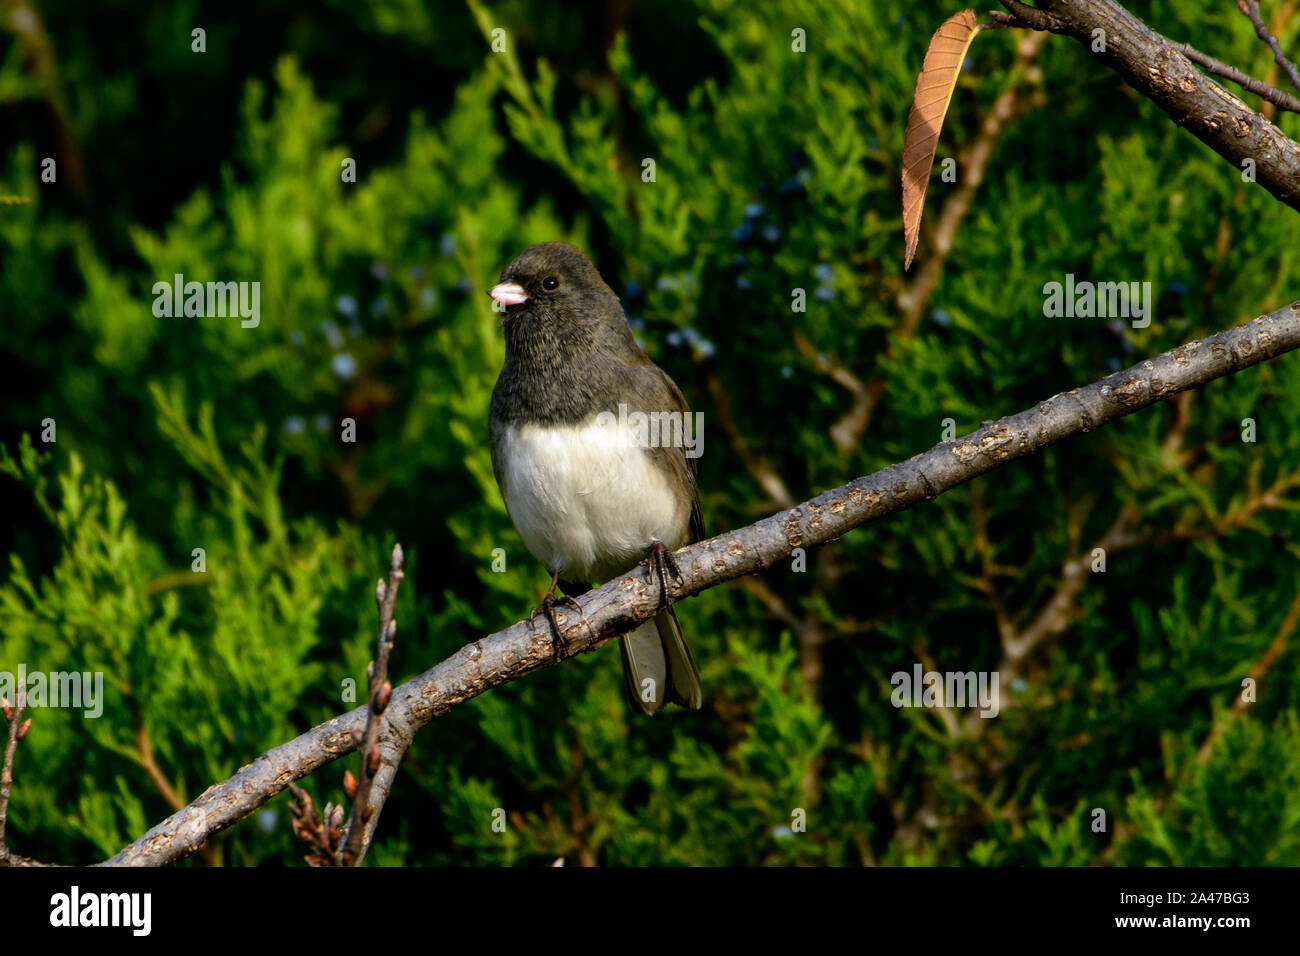 Dark-eyed Junco - Junco hyemalis - perched on branch with evergreen background Stock Photo